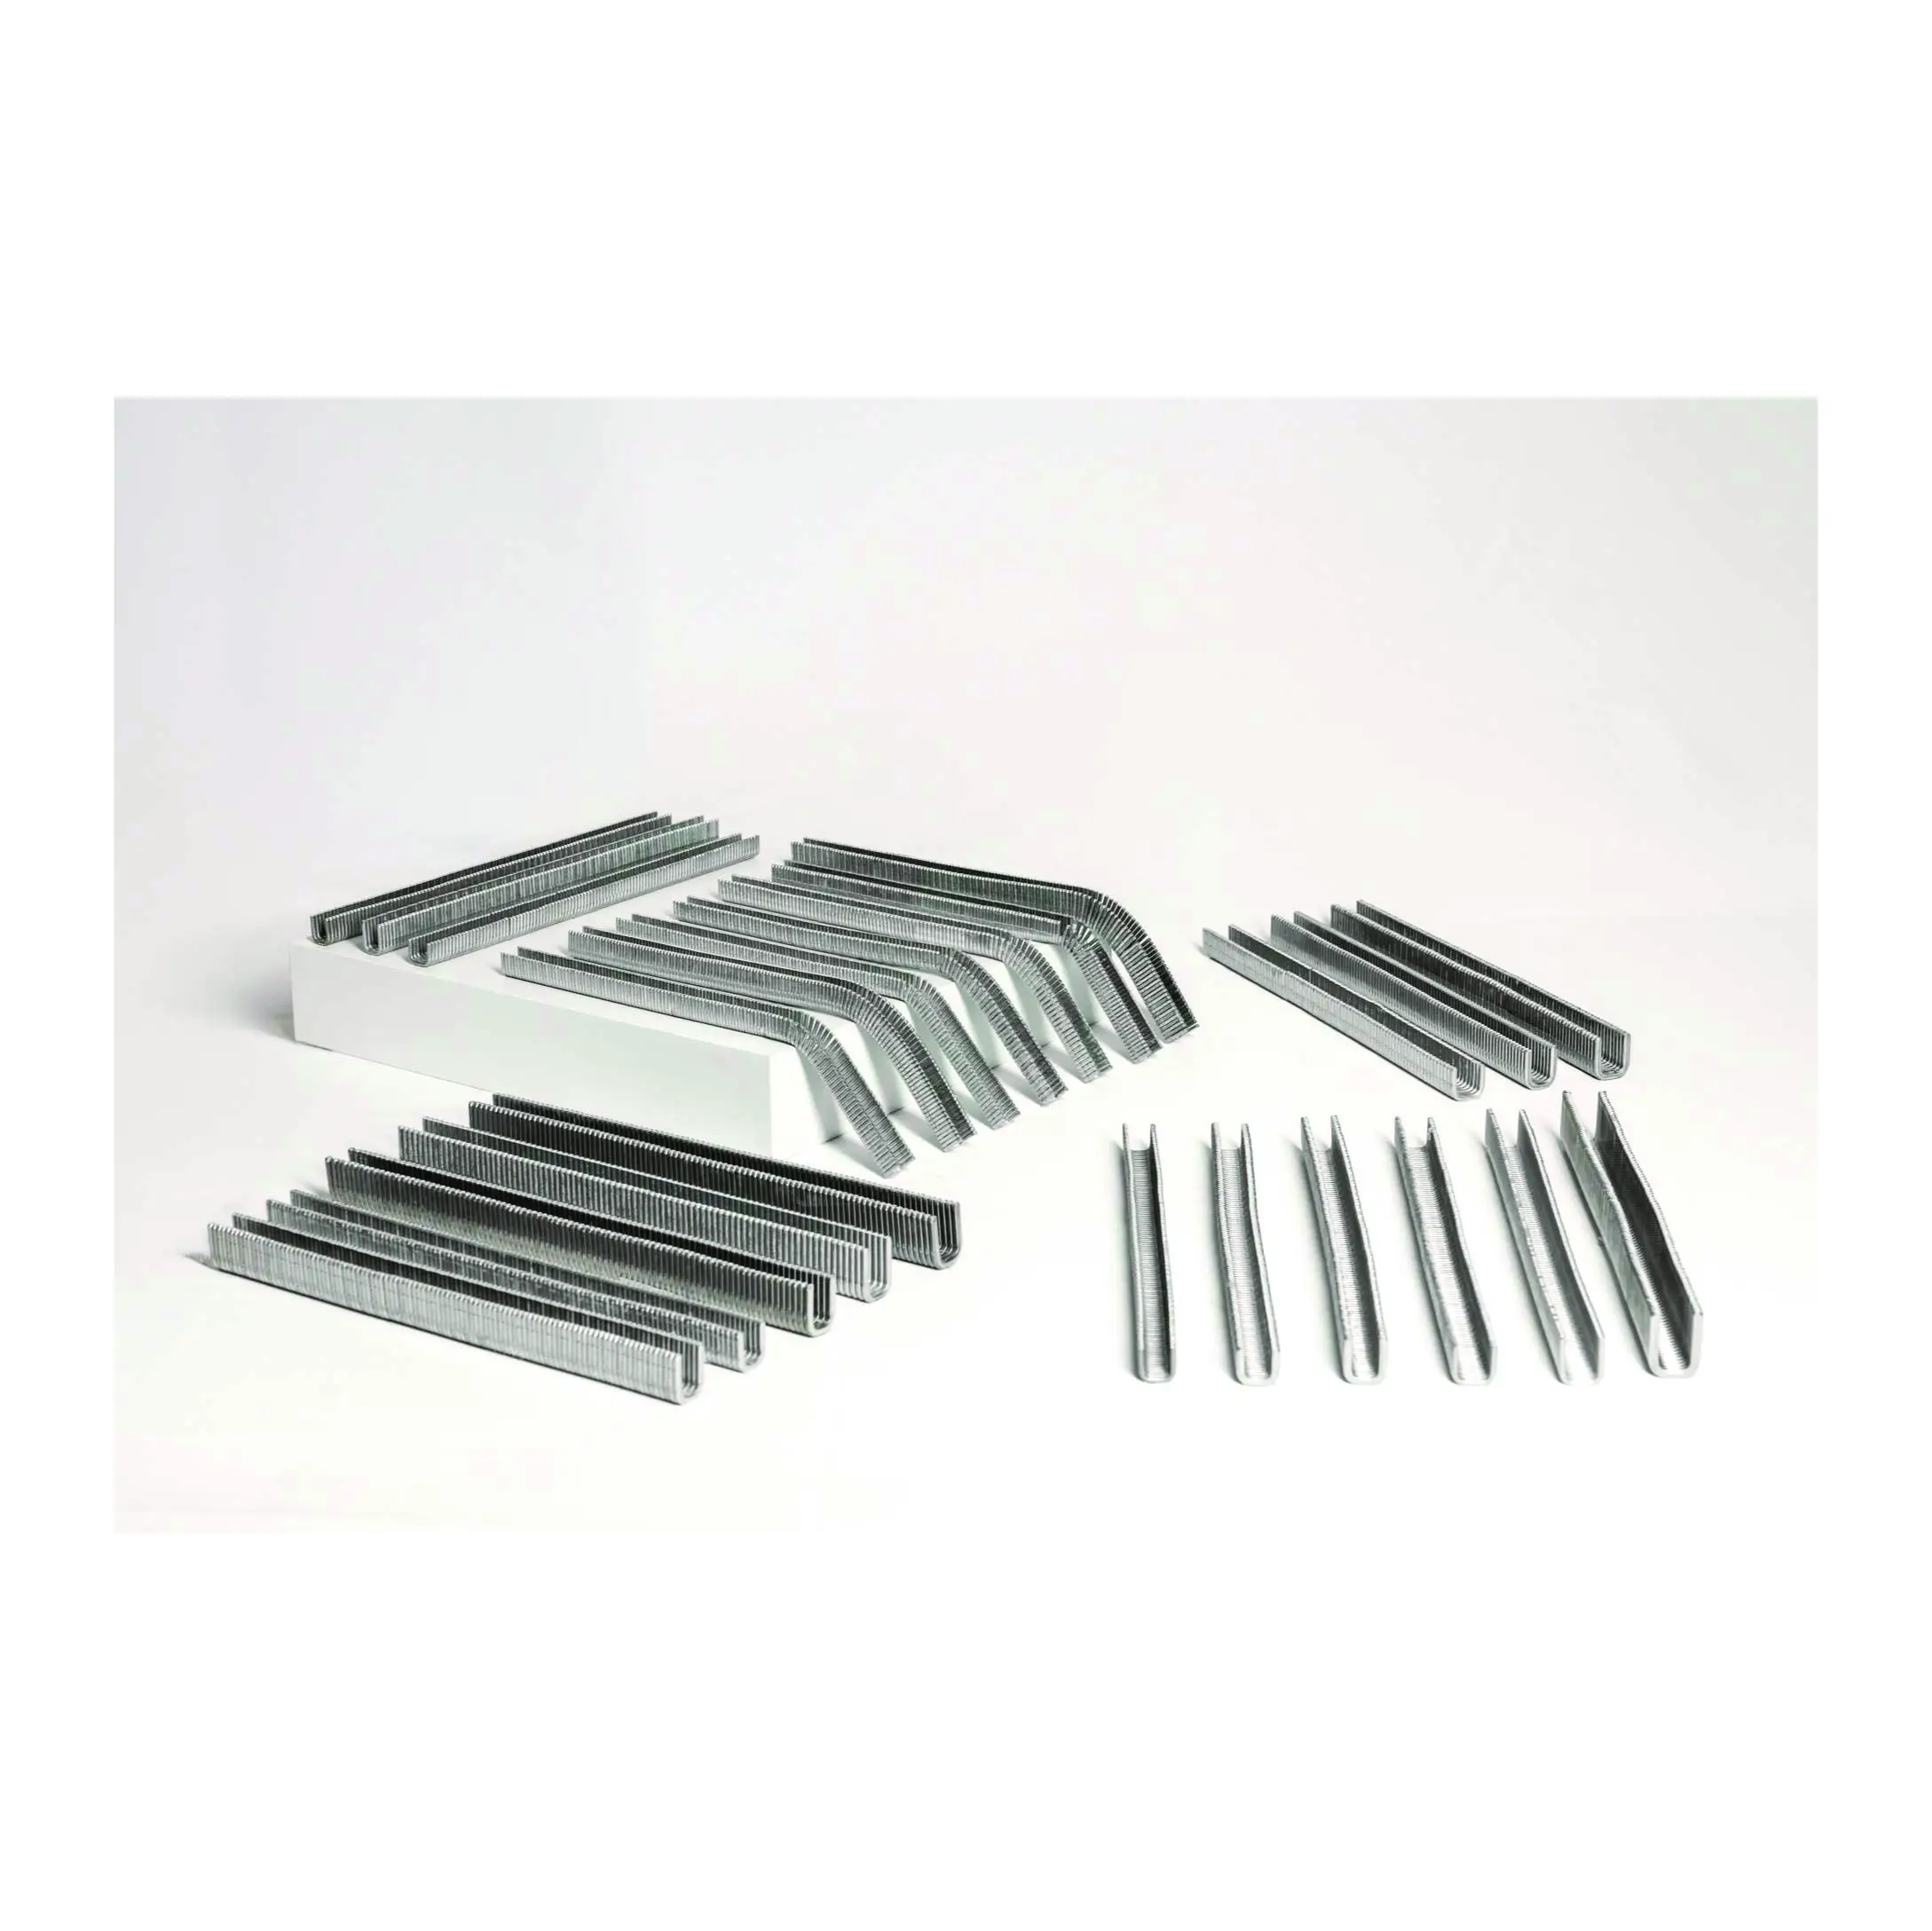 High Quality Metal Meat Clips HeavyDuty Fastening for Meats and Sausages Enhance Food Security 66400Clips per Carton